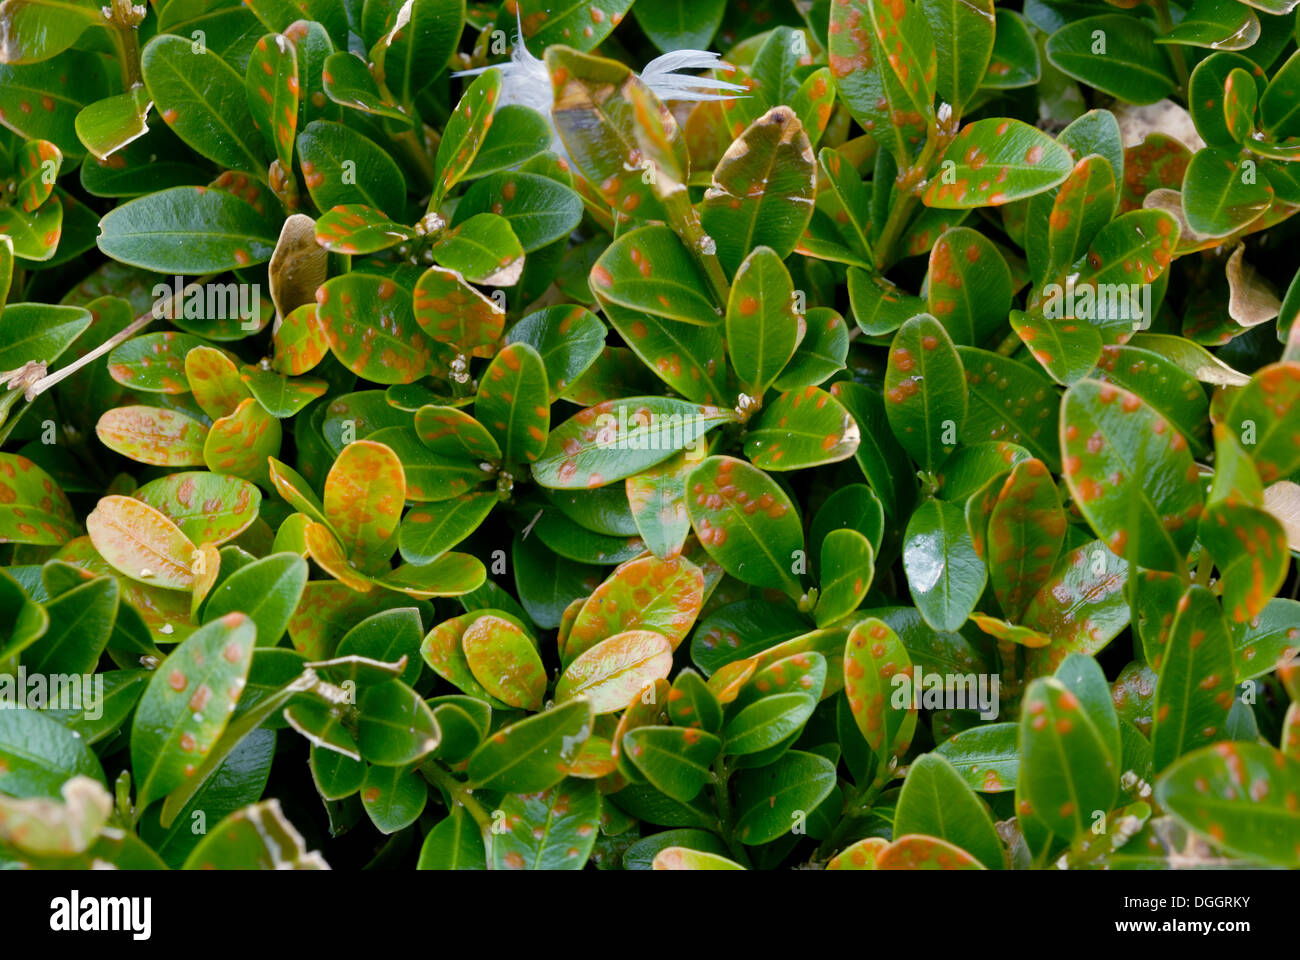 Box rust, Puccia buxi, pustules on the upper surface of a diseased parterre hedge leaves Stock Photo